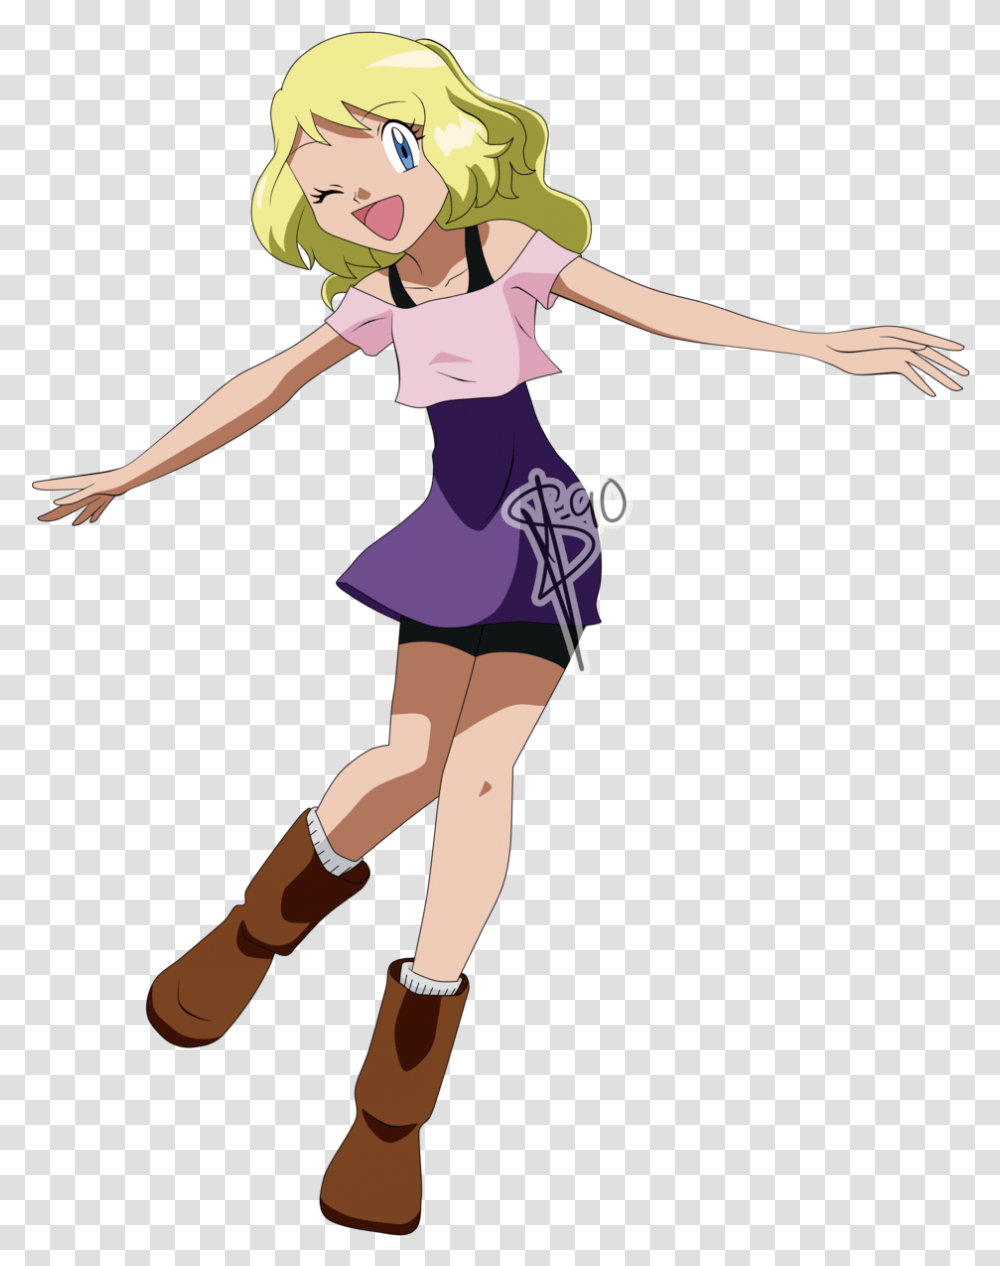 Pokemon Serena Pokemon Serena And Clemont Daughter, Person, Costume, Dance Pose, Leisure Activities Transparent Png